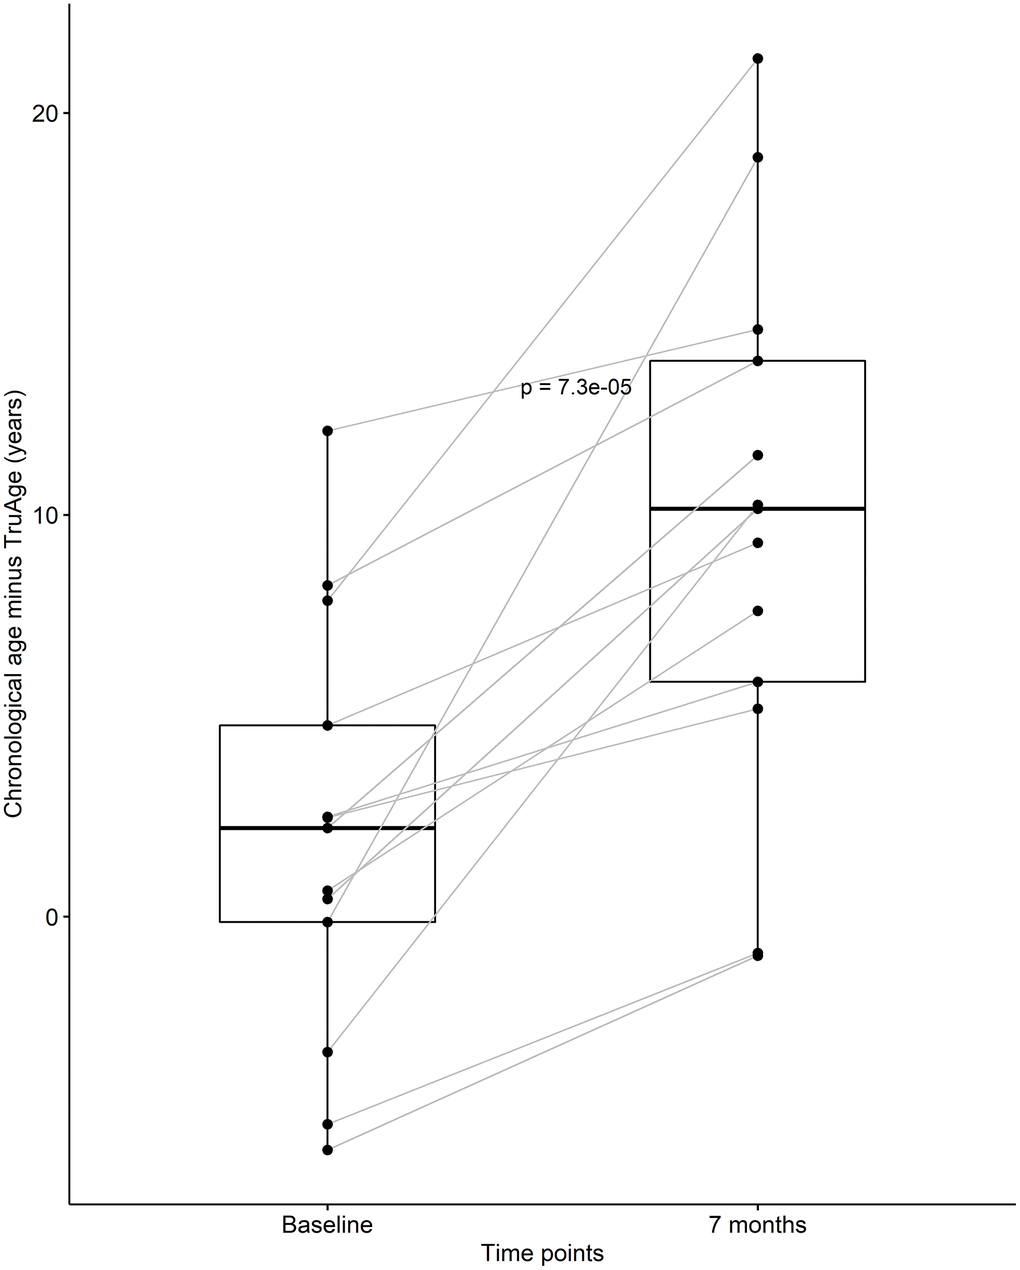 CaAKG decreased methylation age among a homogeneous sub-population. The paired box plots represent the treatment effects at the patient and group level (n=13), between baseline and end of the trial (which on average had a duration of 7 months). The box plots depict the median and the 25th and 75th quartiles.